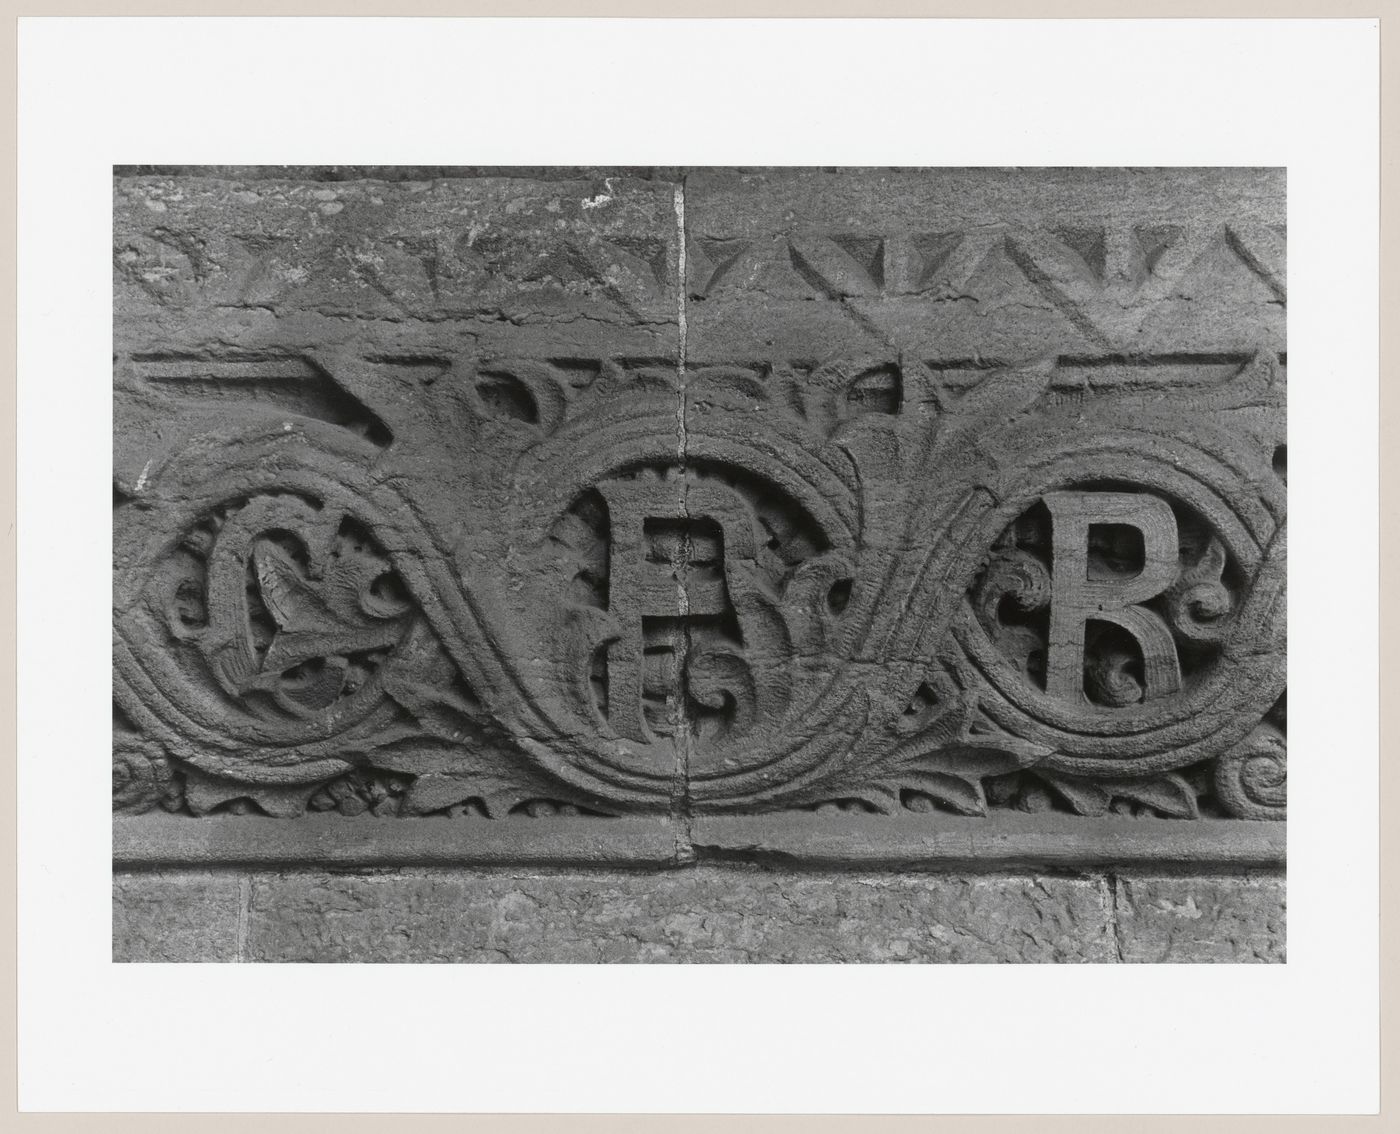 Close-up view of the Canadian Pacific Railway monogram carved in stone at the main entrance of Windsor Station, 1100 rue de la Gauchetière, Montréal, Québec